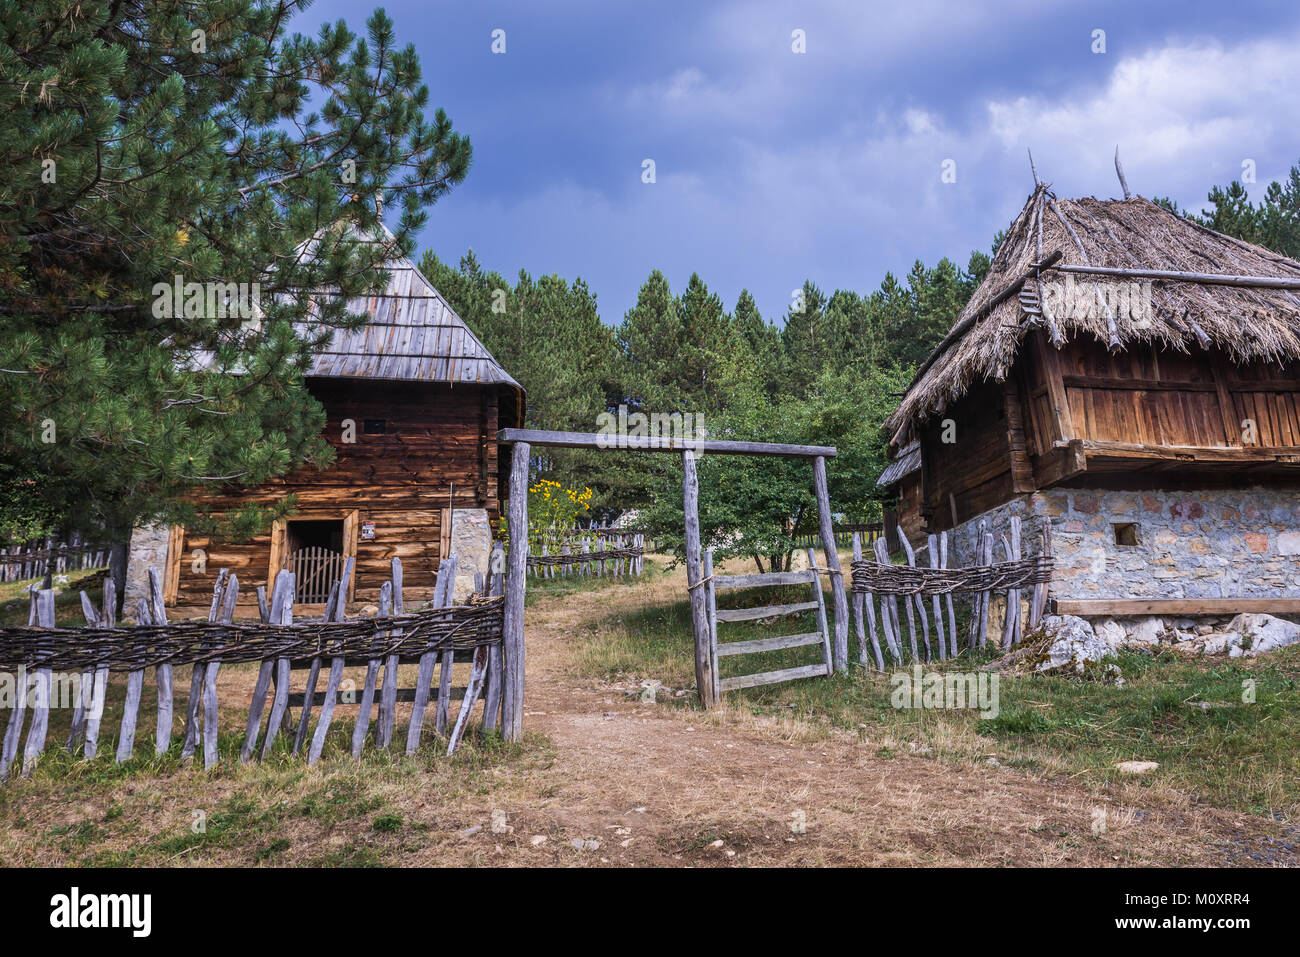 Wooden cottages in Ethnographic heritage park called Old Village Museum in Sirogojno village, Zlatibor region in western part of Serbia Stock Photo